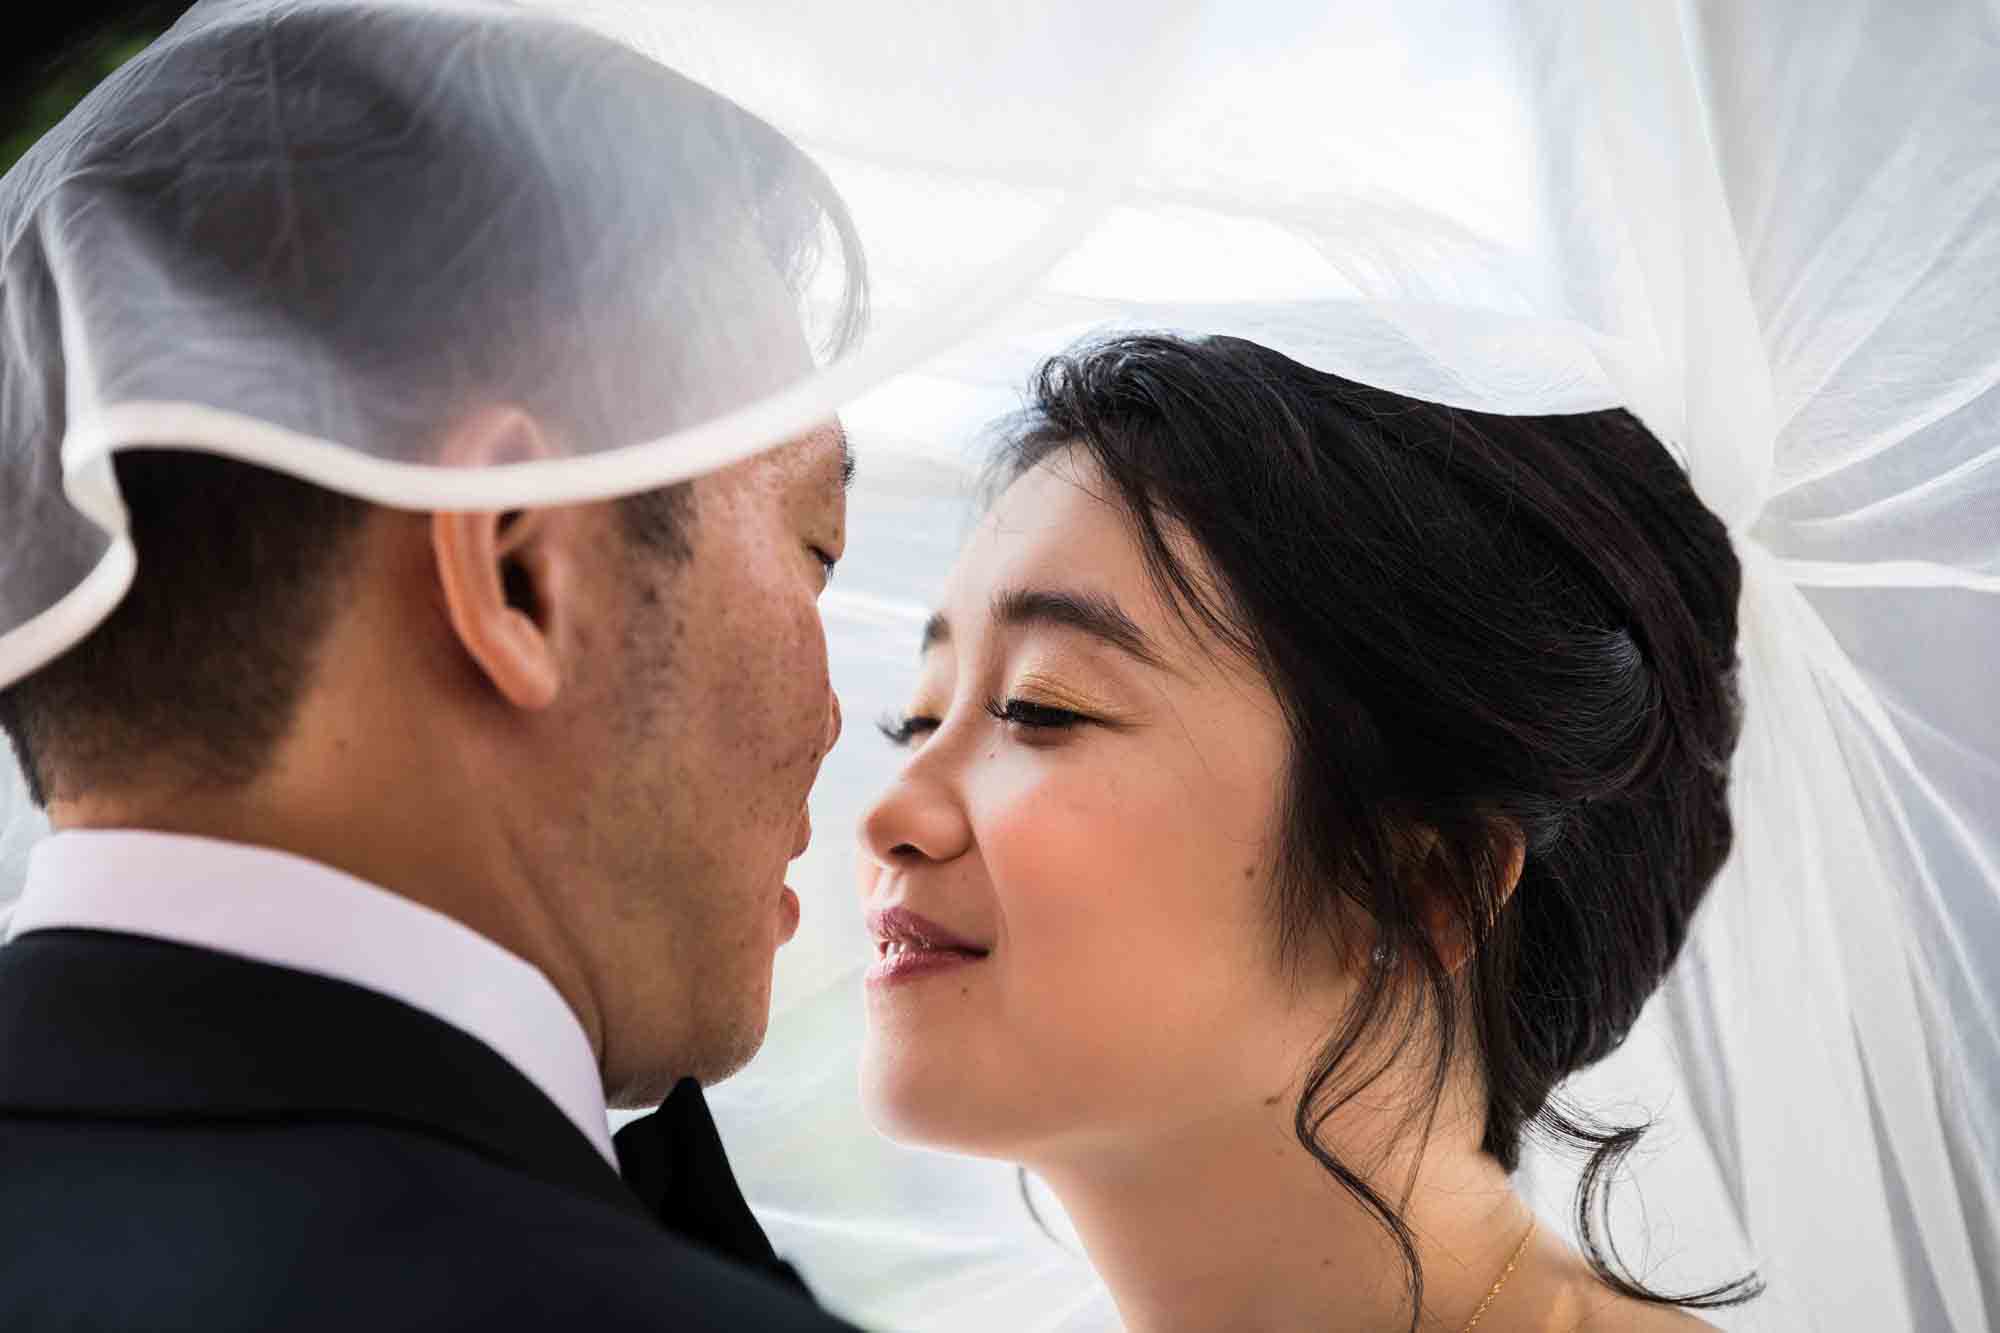 Bride and groom about to kiss under veil during a Sheraton LaGuardia East Hotel wedding